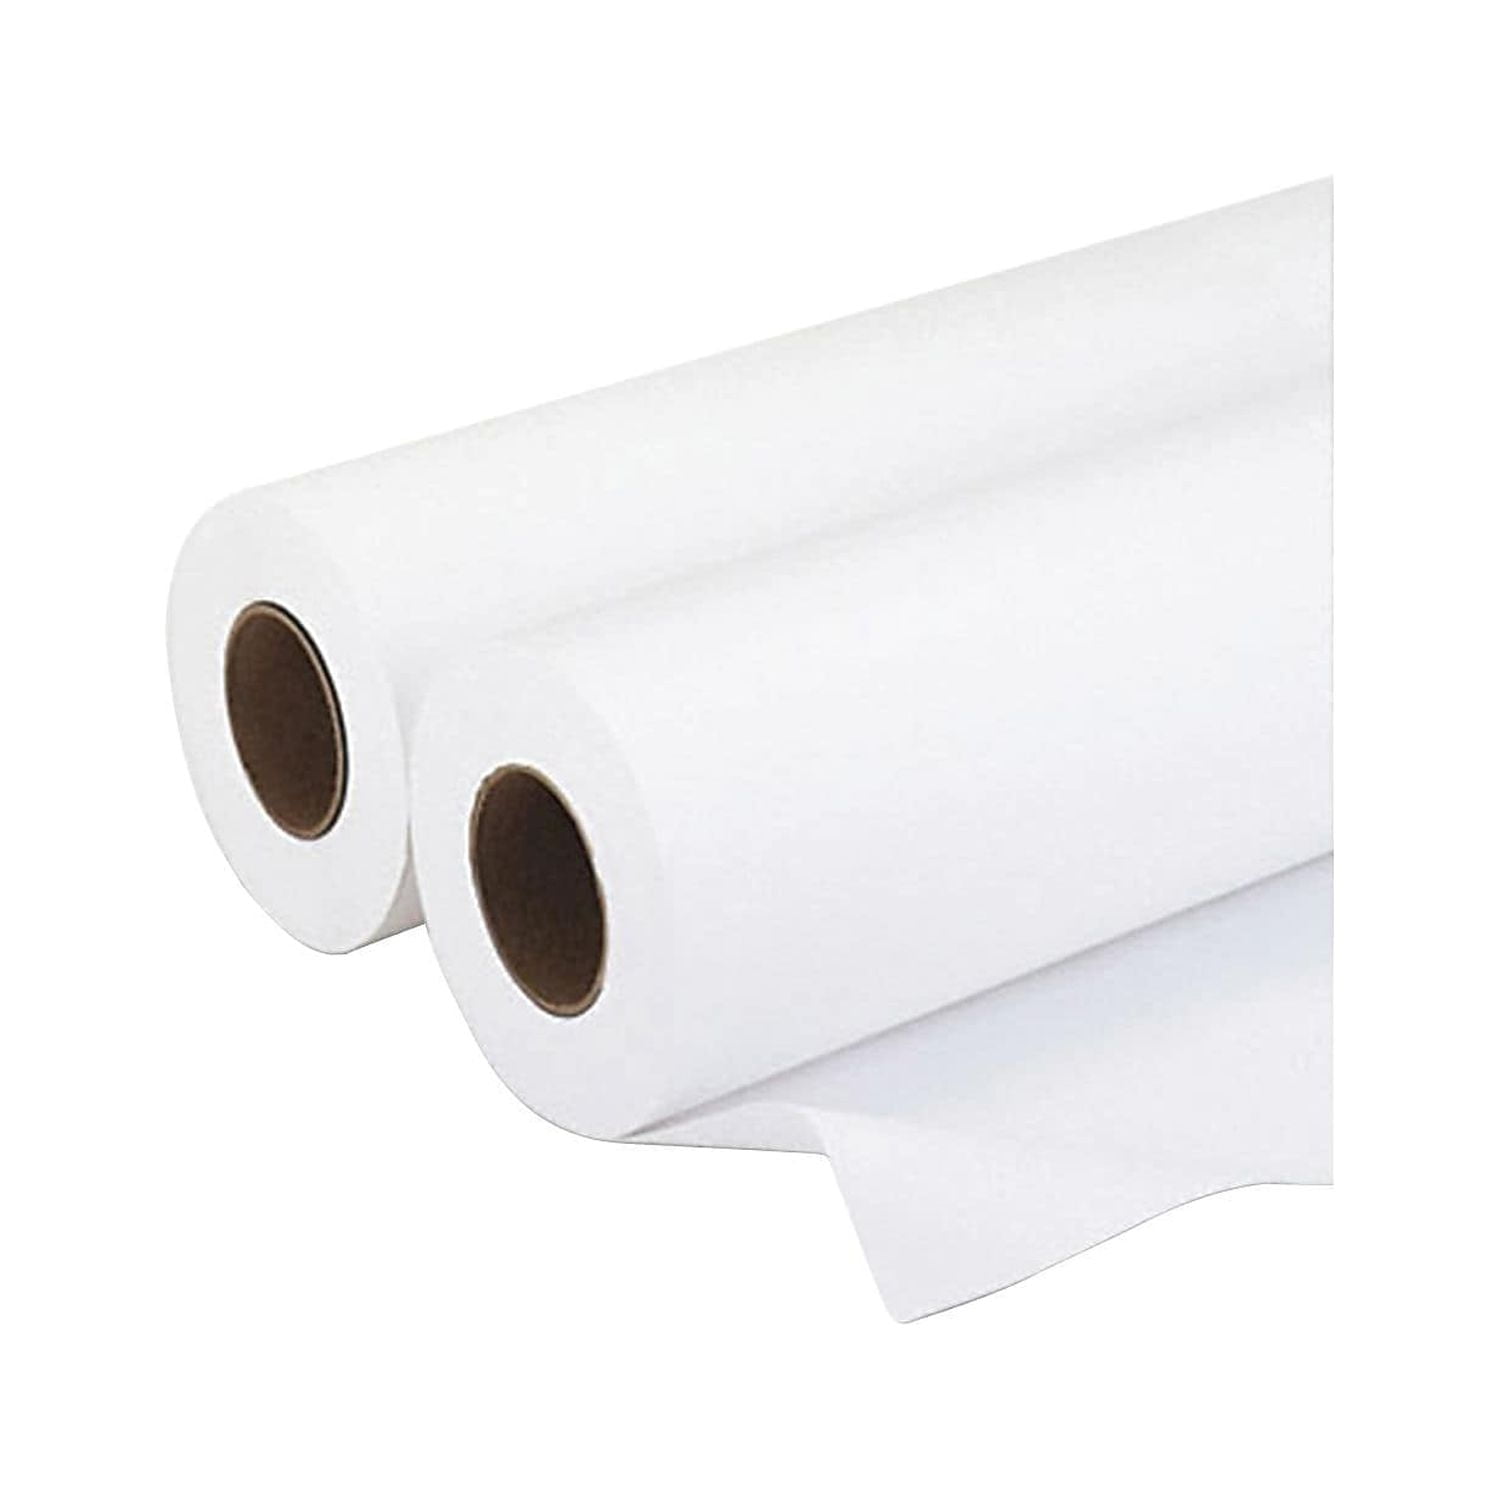 Heavy weight Packing paper roll, wide 35 - household items - by owner -  housewares sale - craigslist